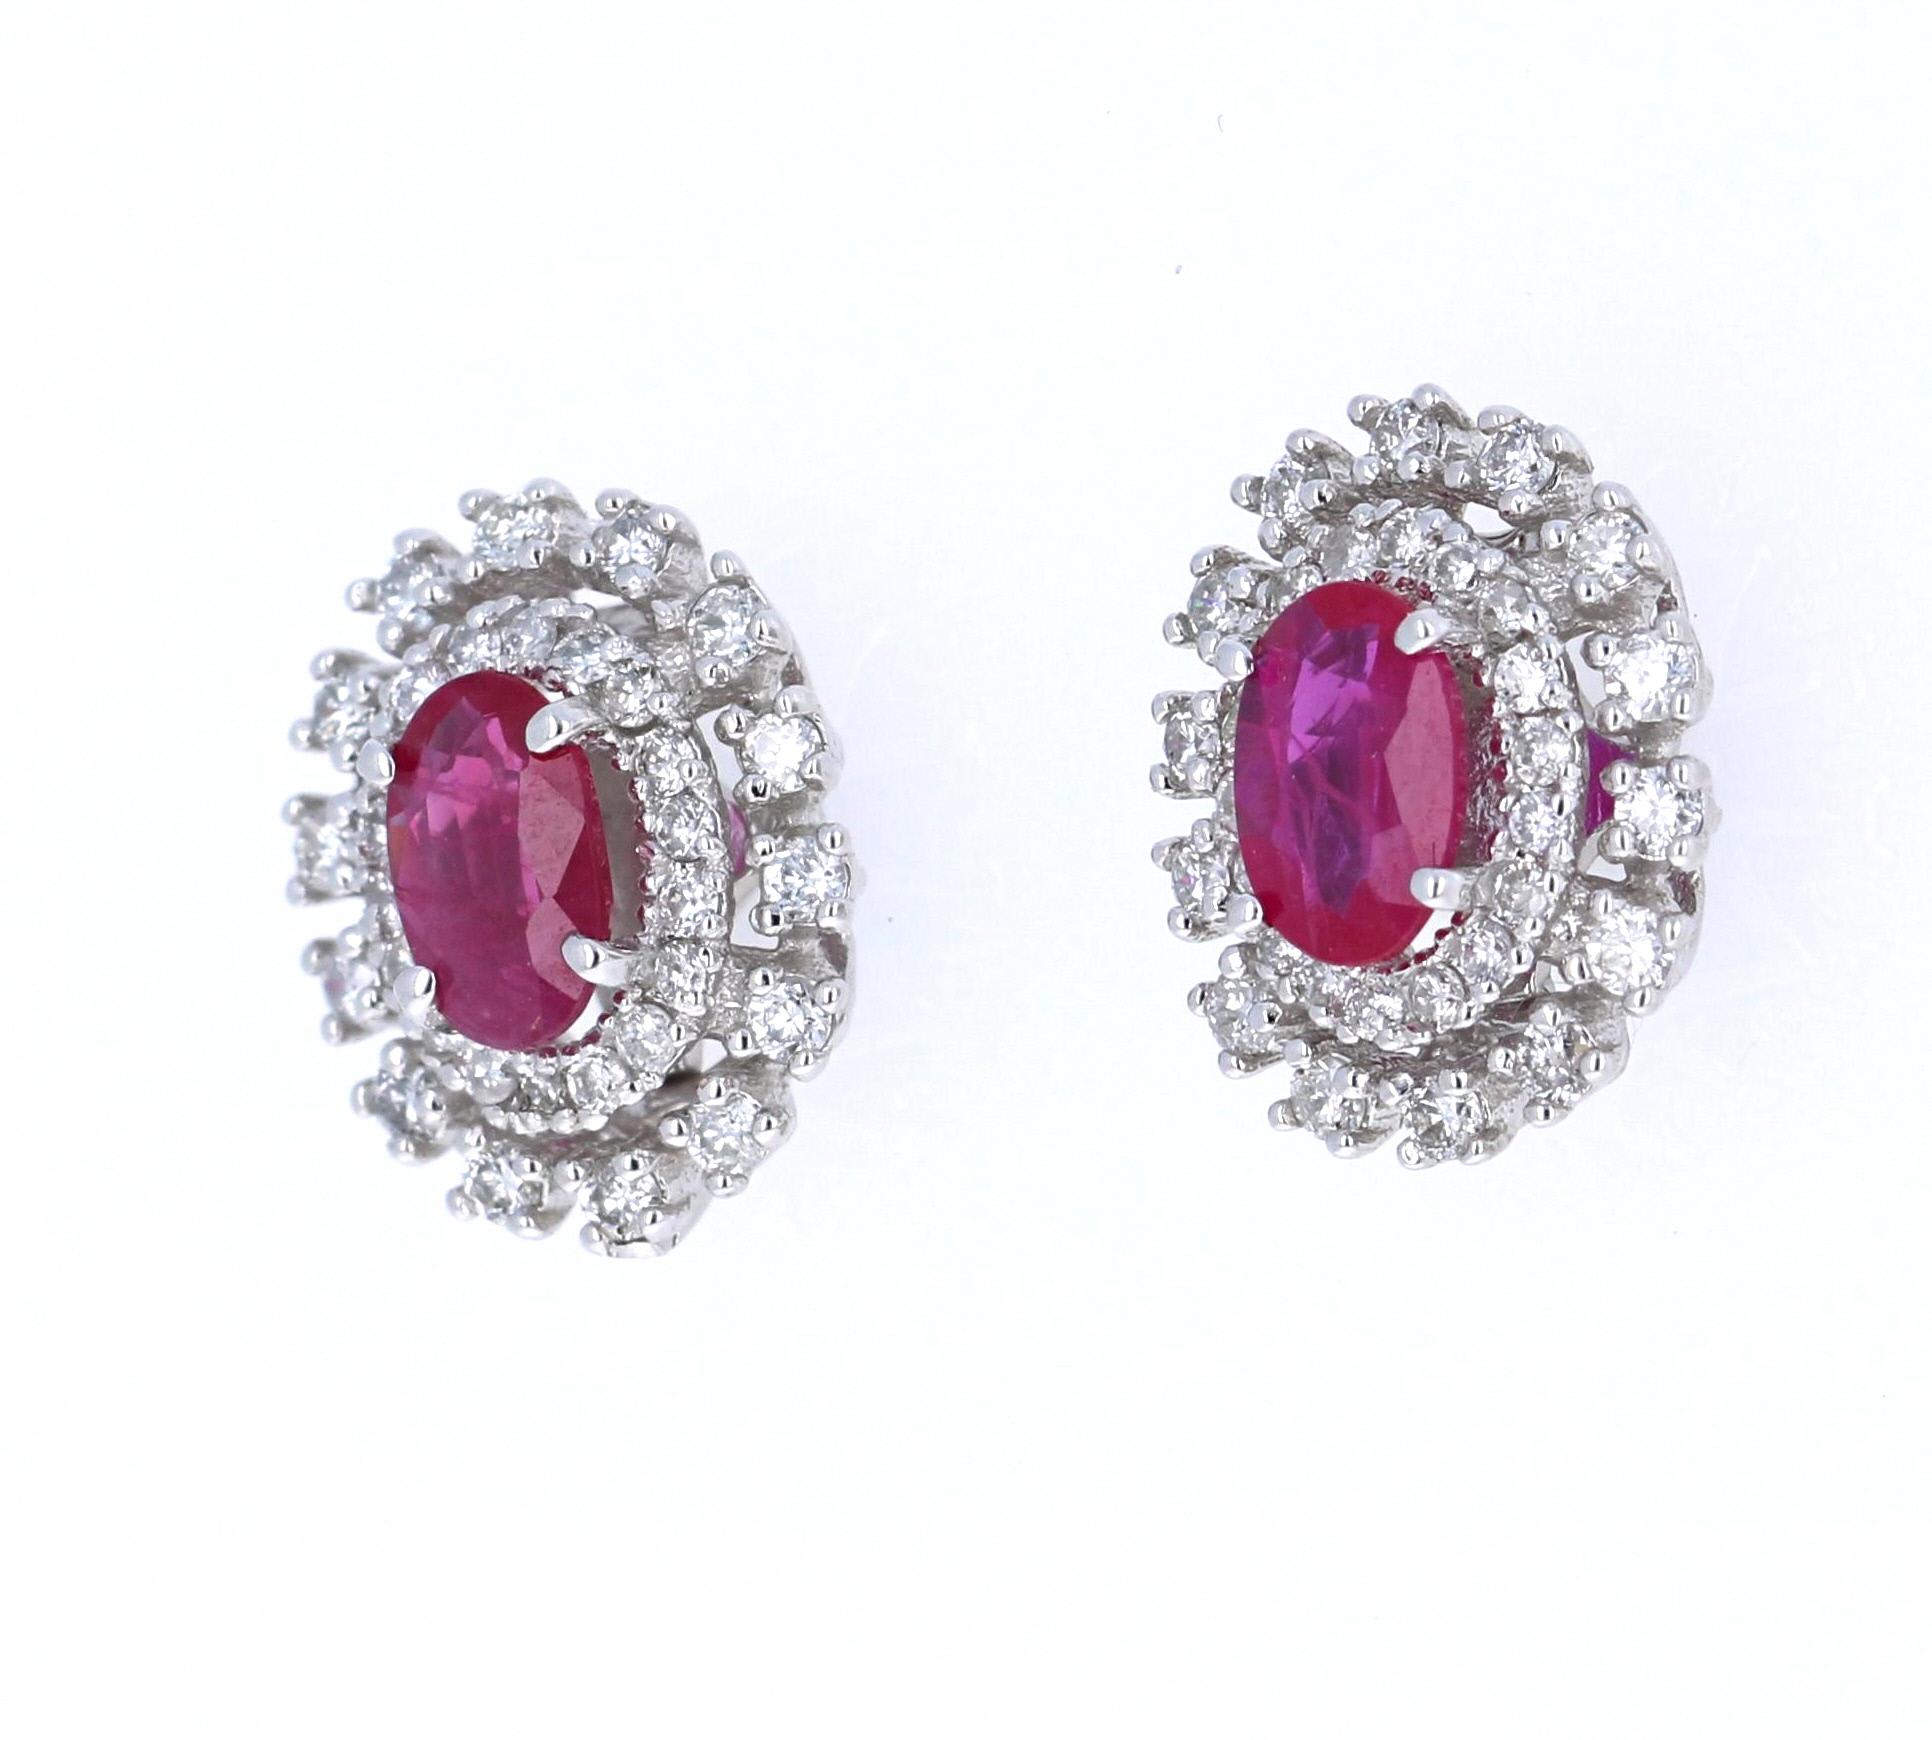 These absolute beauties have 2 Natural Rubies that weigh 0.86 Carats and are surrounded by 64 Round Cut Diamonds that weigh 0.50 Carats. (Clarity: VS, Color: H)

They are made in 14 Karat White Gold and weigh approximately 2.6 grams. The setting of